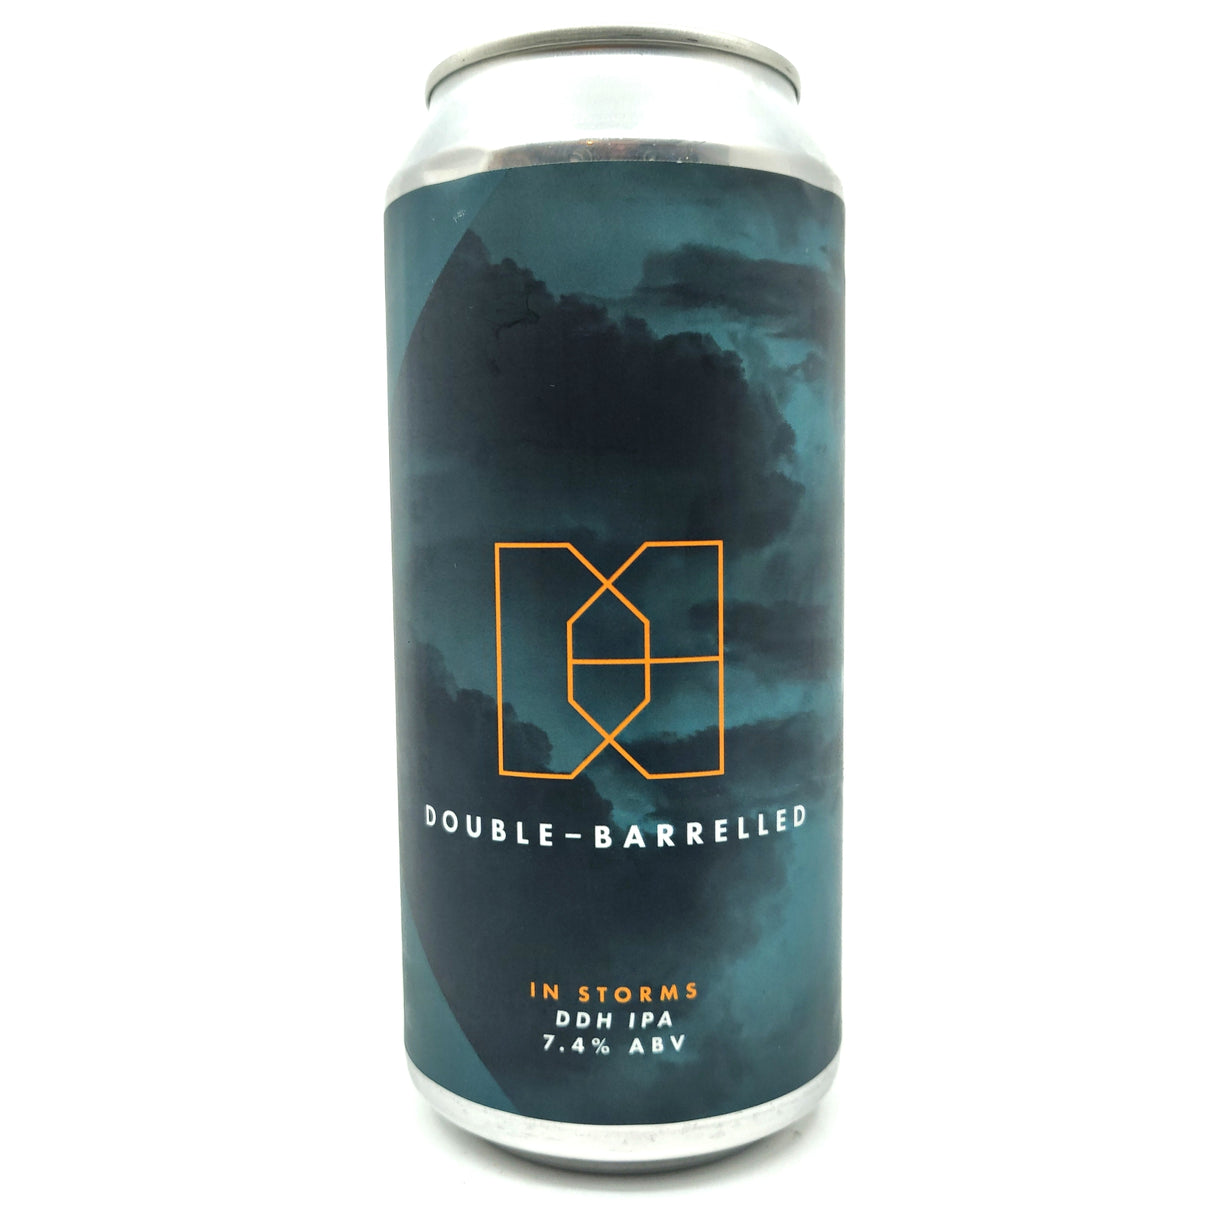 Double Barrelled In Storms IPA 7.4% (440ml can)-Hop Burns & Black